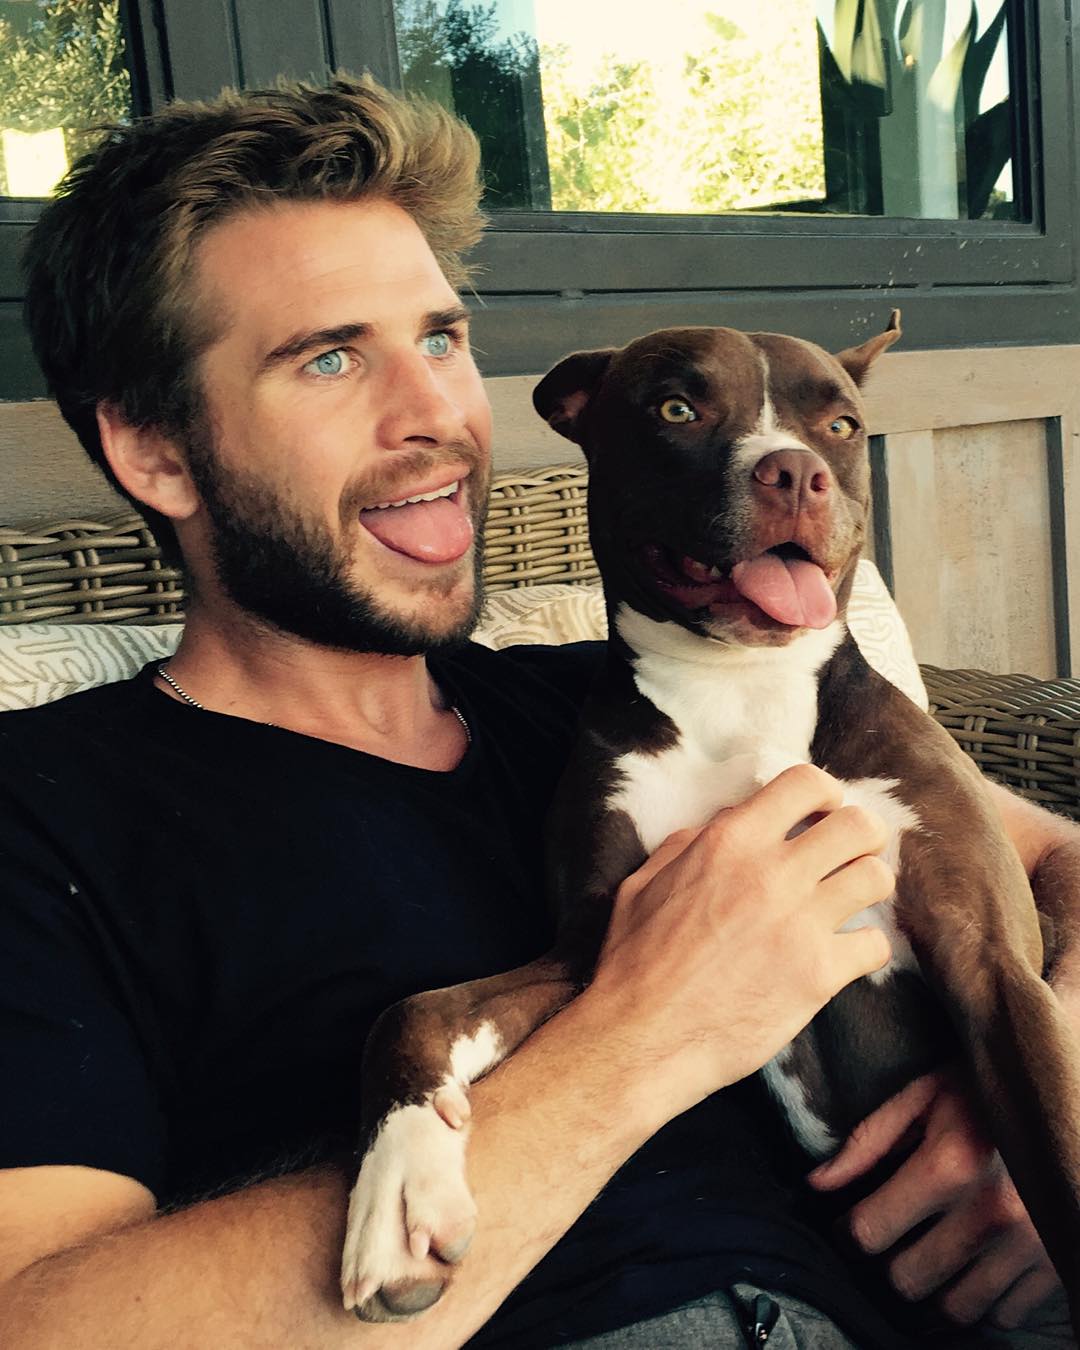 Liam Hemsworth sitting on the chair with its Pit Bull dog while they both are sticking their tongue out